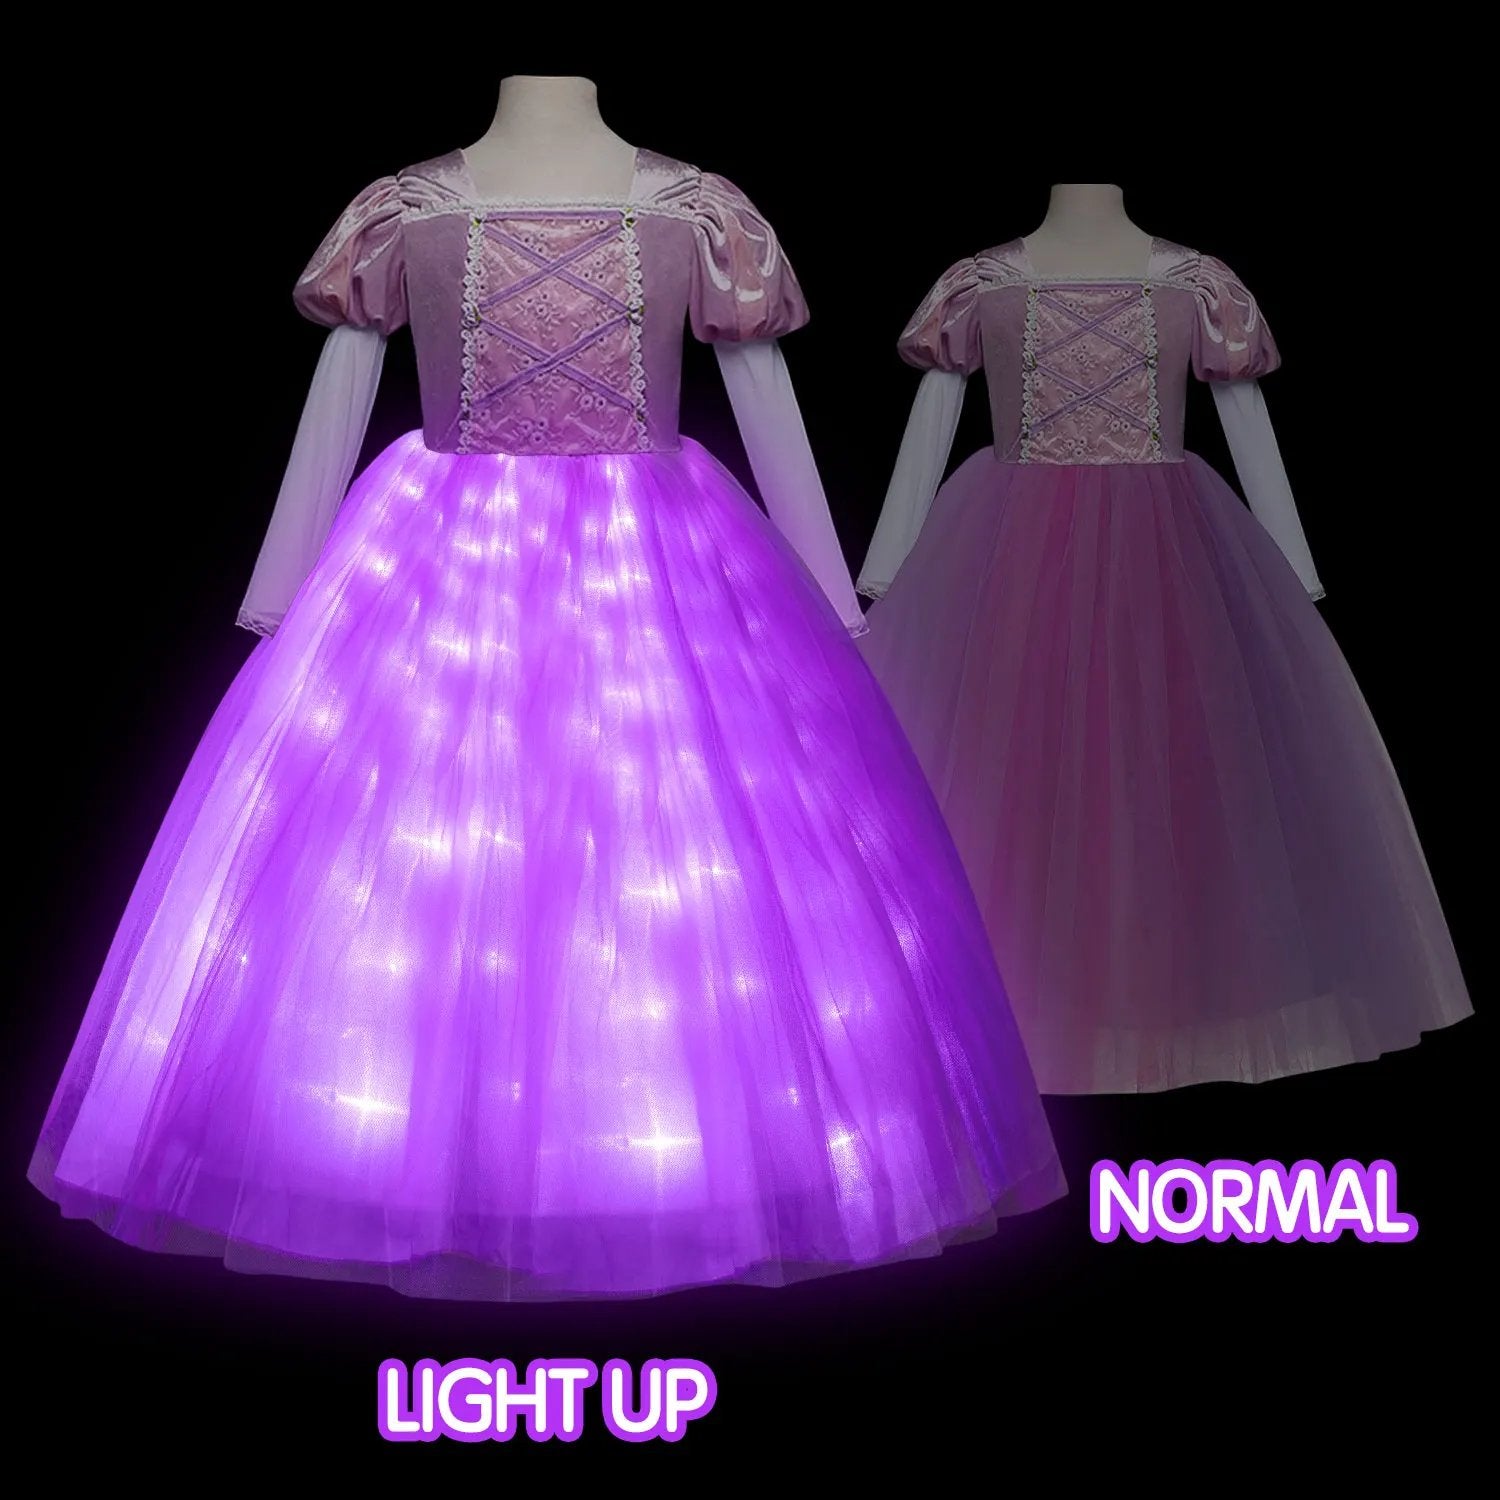 Kids Light Up Dress Long Hair Princess of Corona LED Fancy Costume Birthday Party Outfit